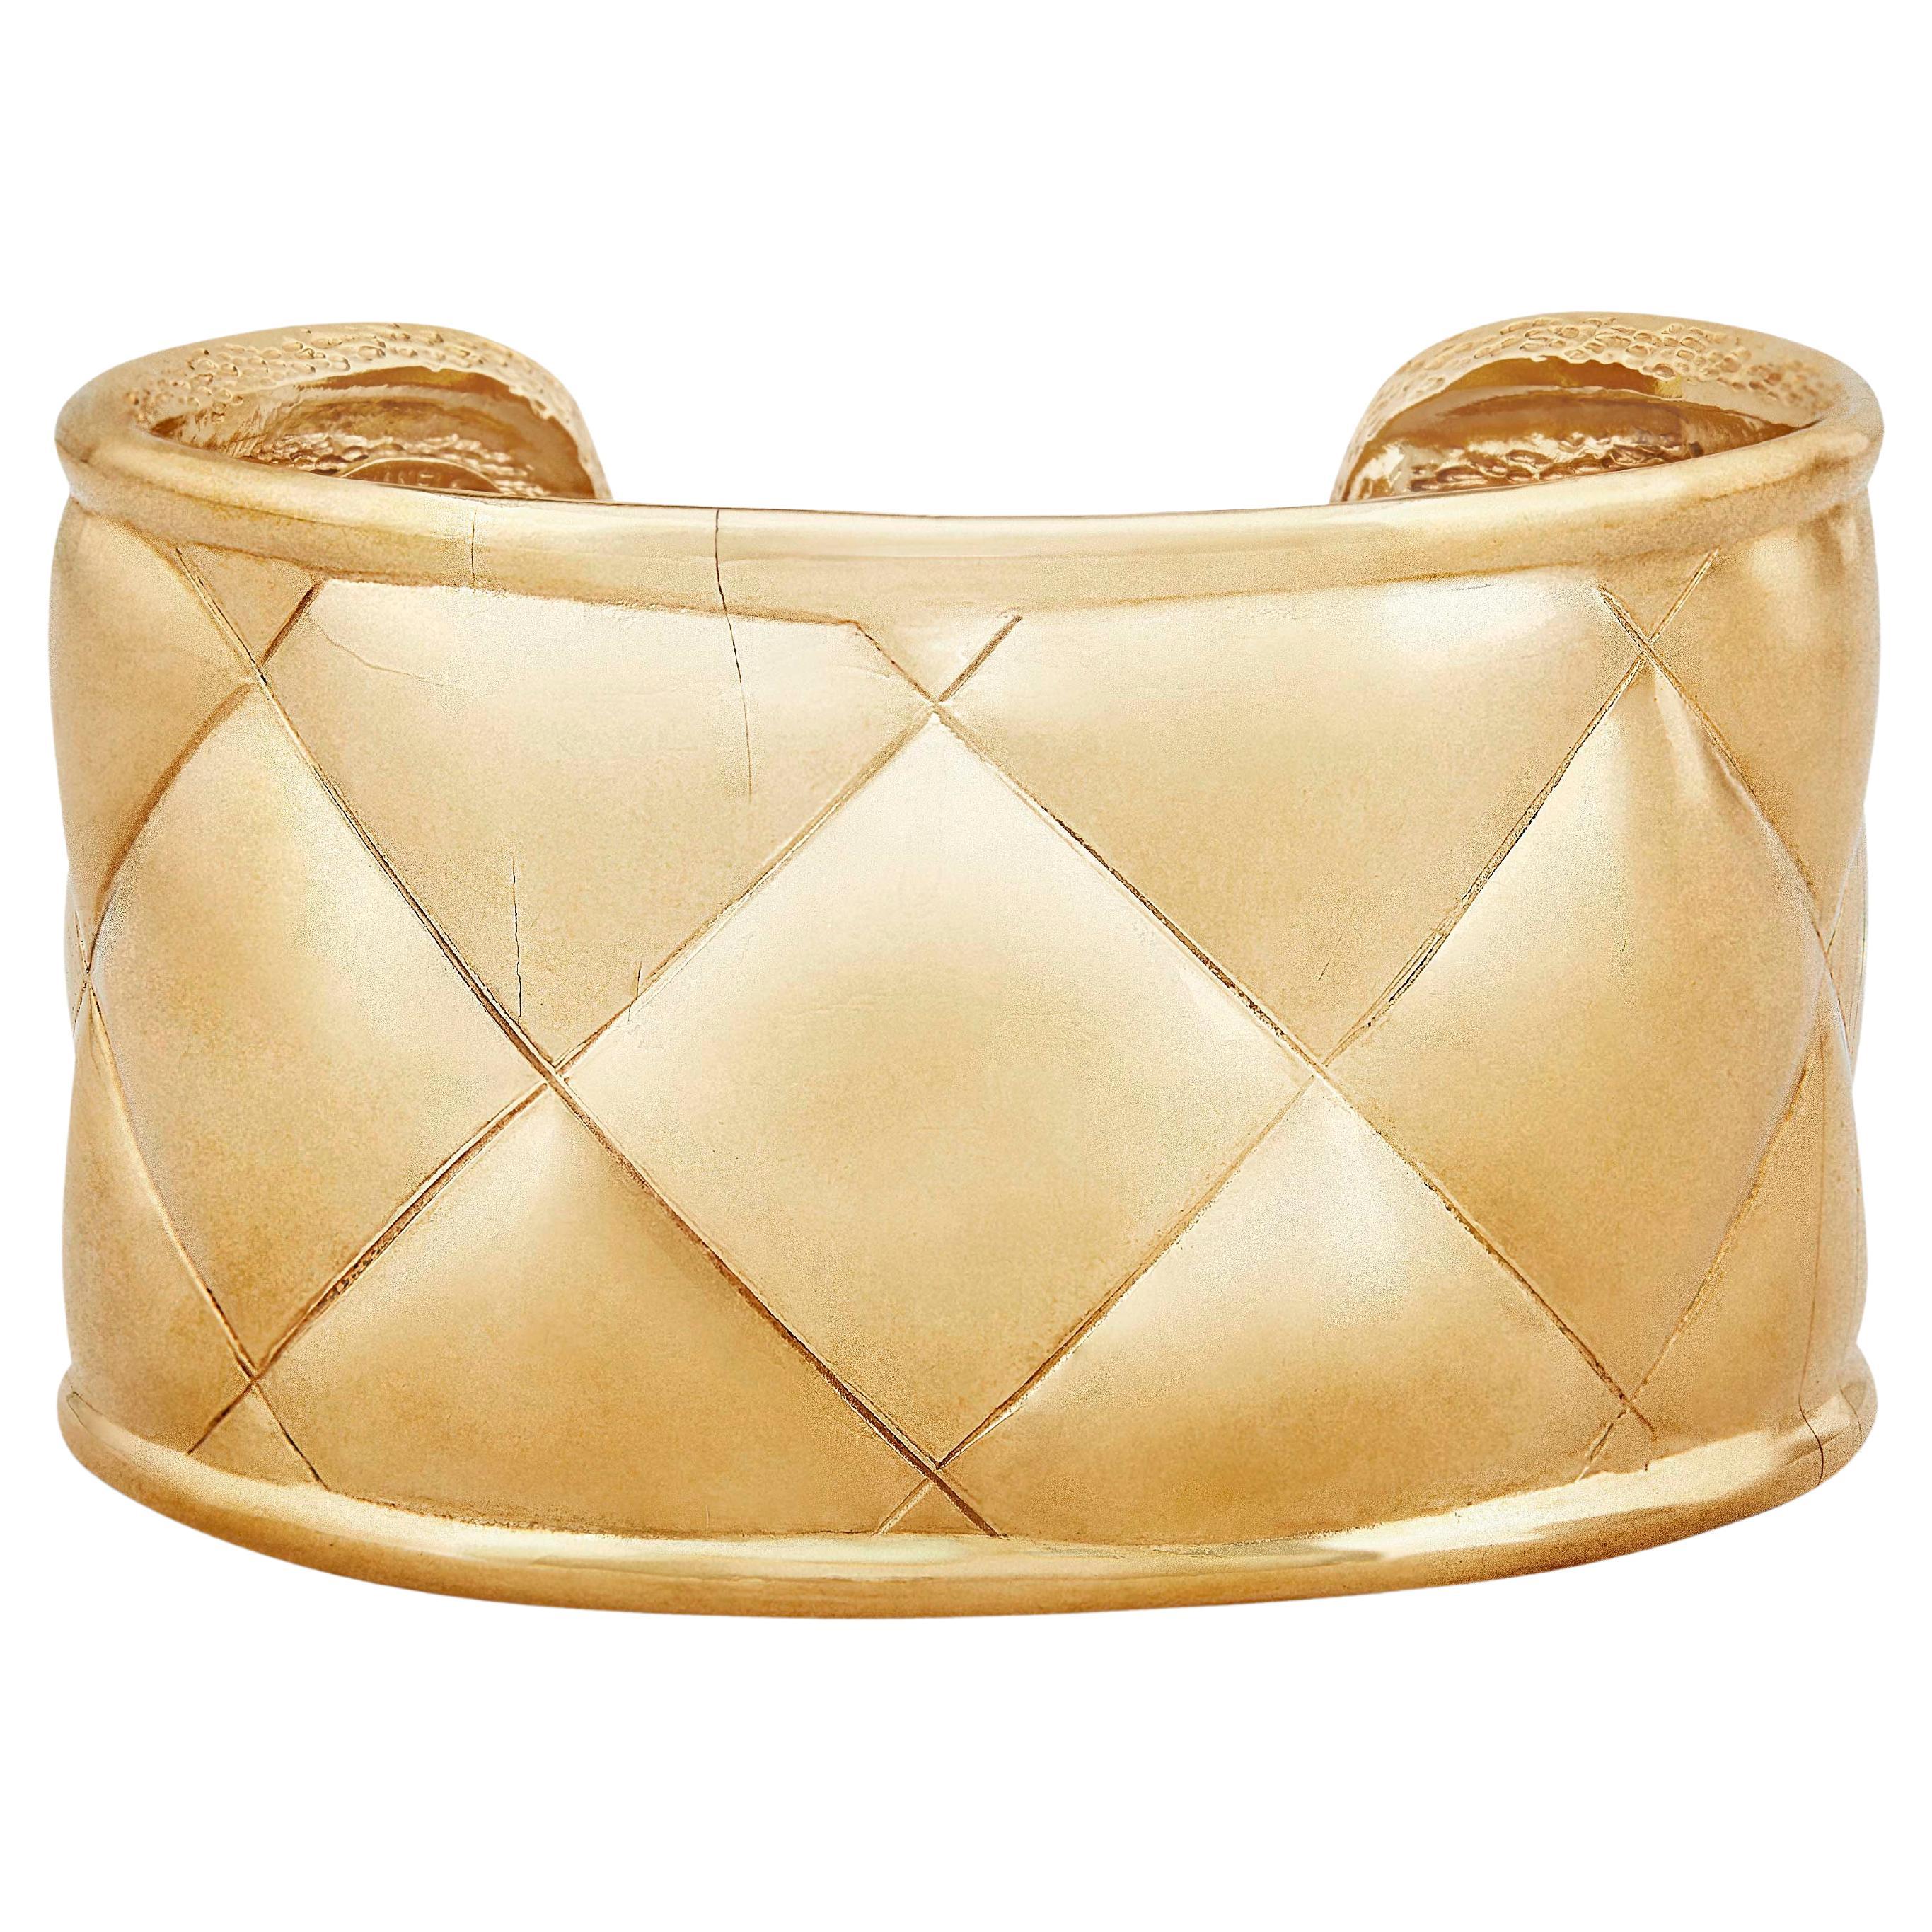 Authentic Chanel Gold Calfskin Leather Logo Cuff Bracelet For Sale 